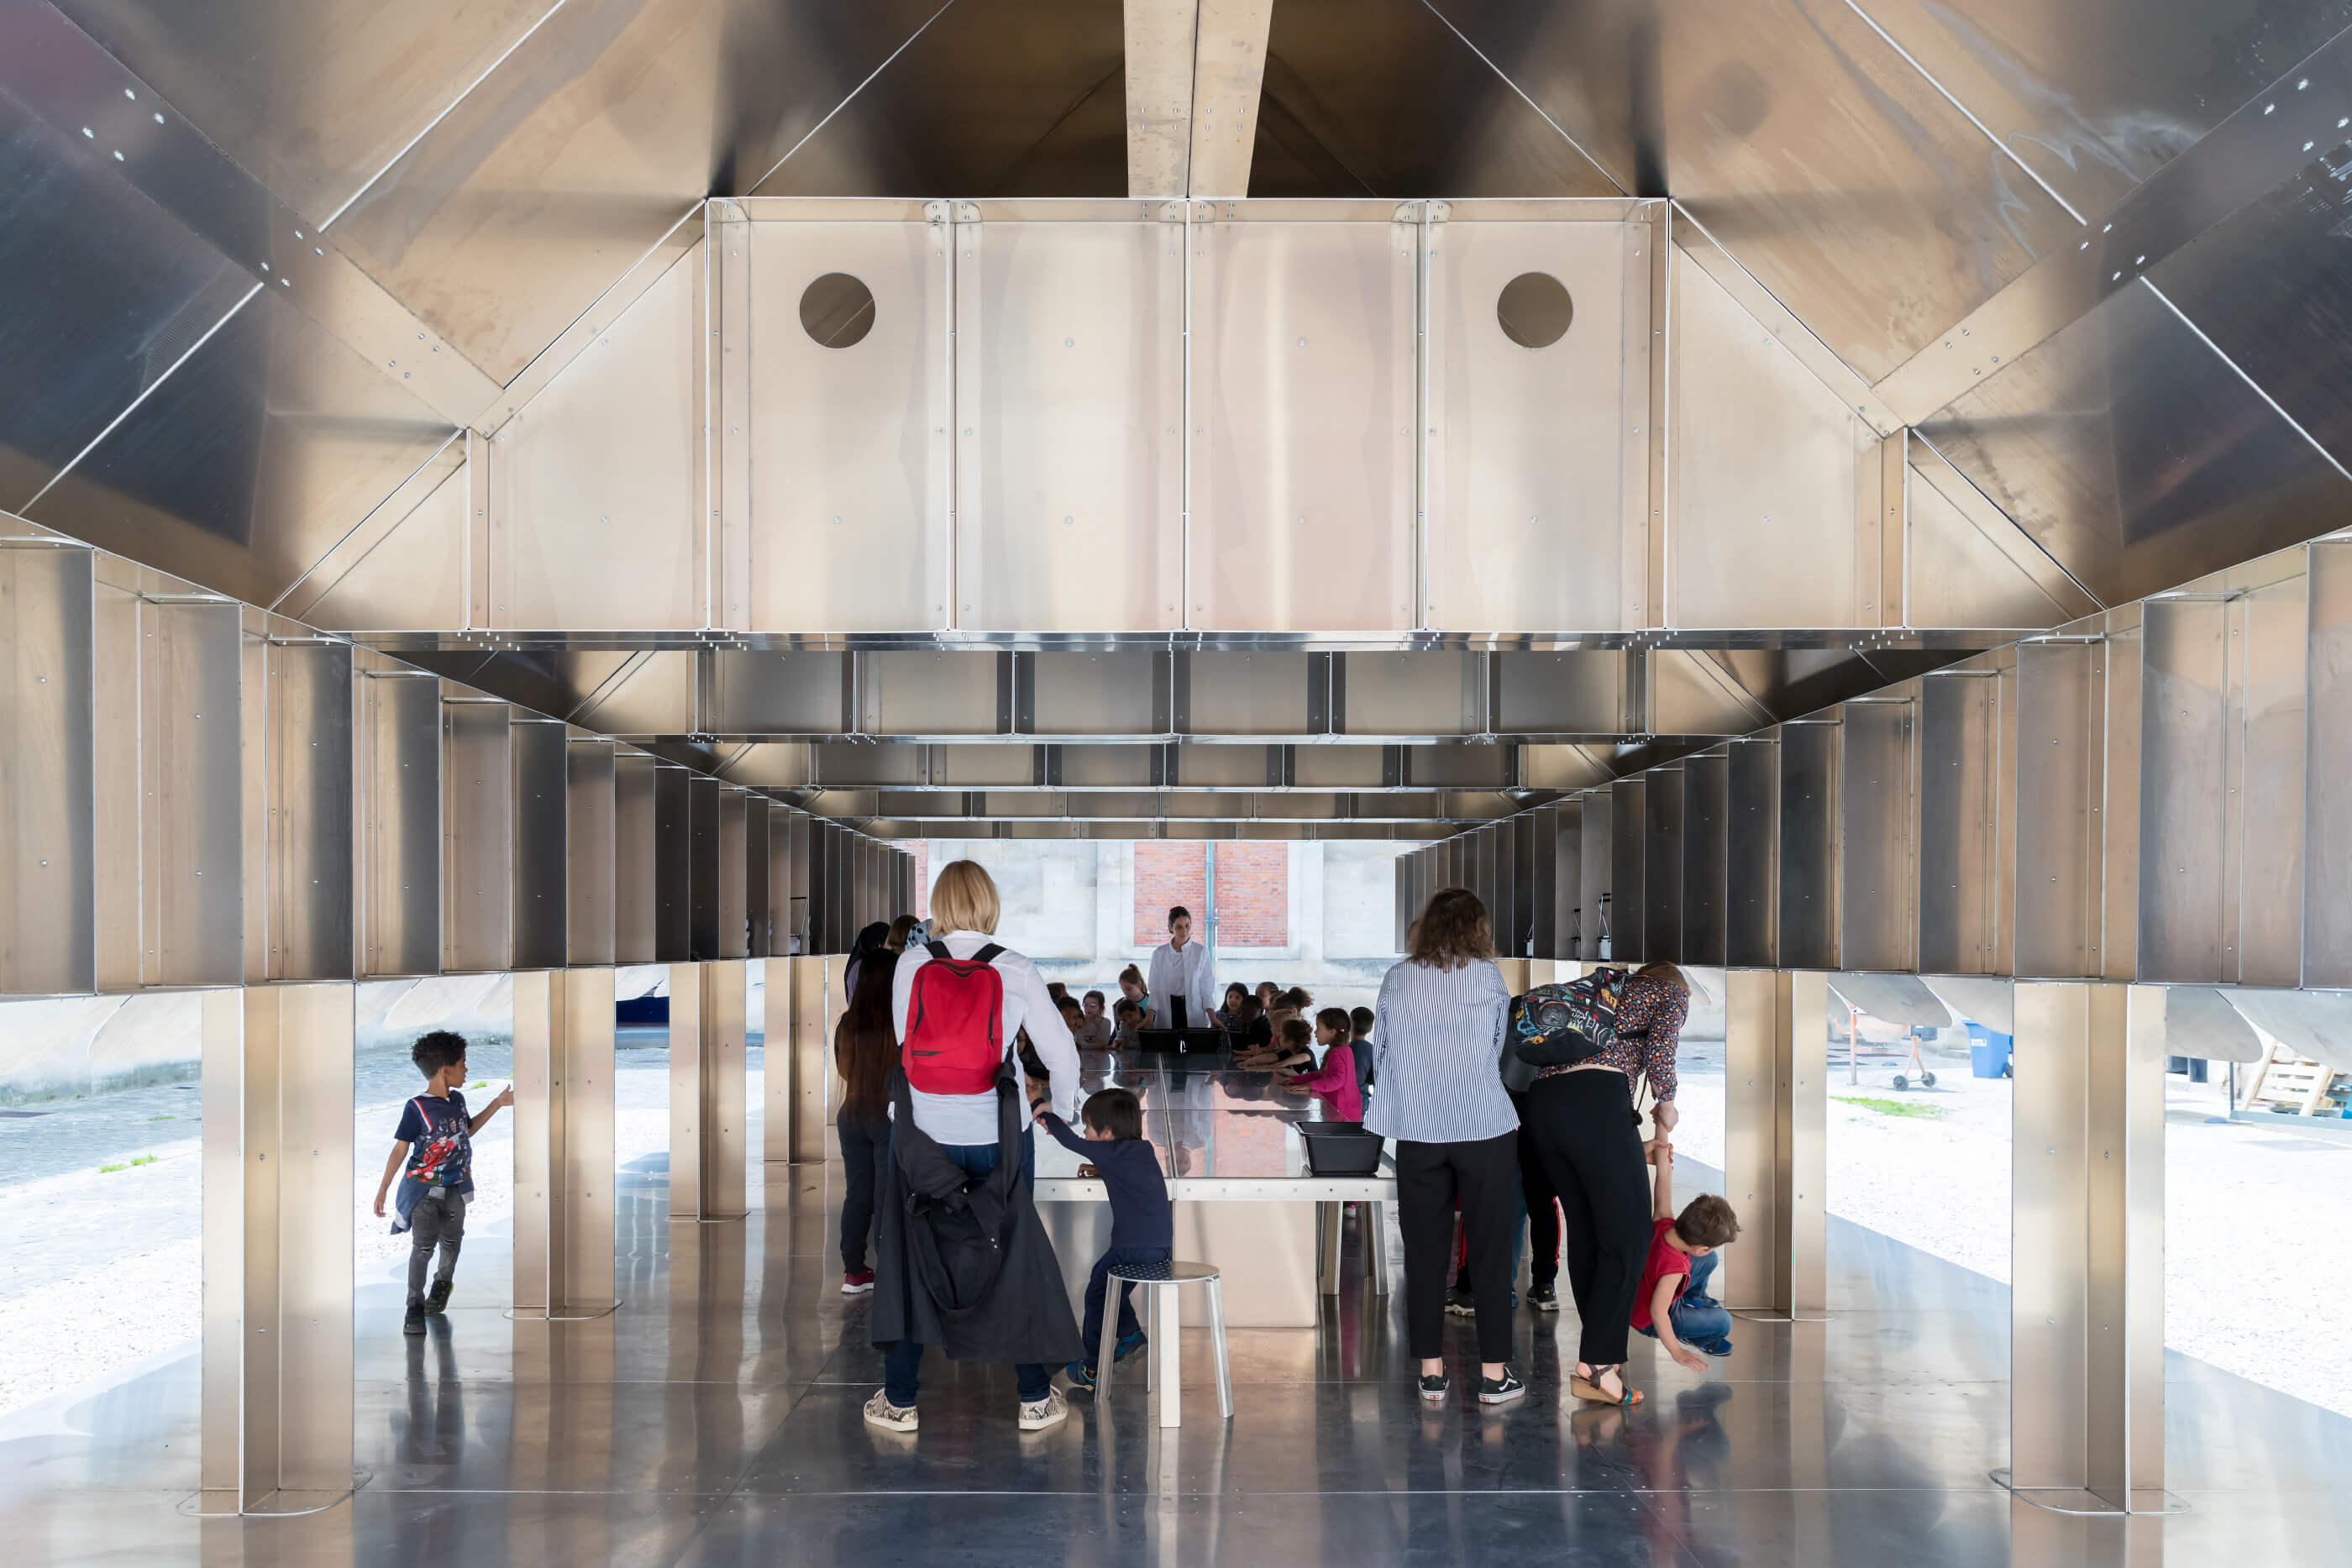 Inside a school by MOS decked out in stainless steel walls and ceiling